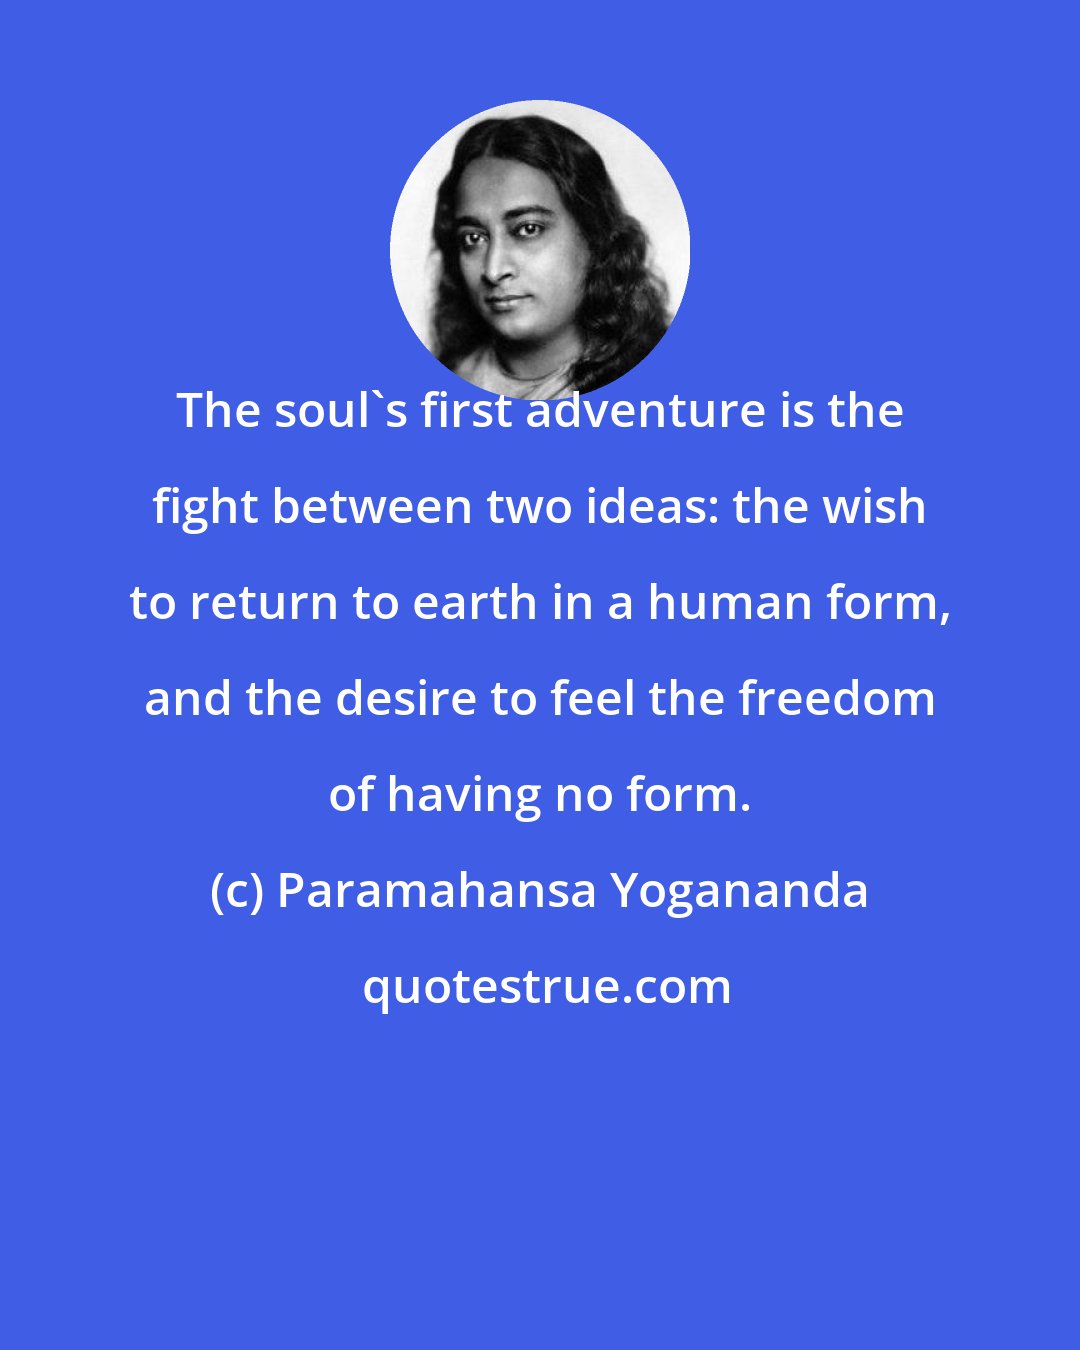 Paramahansa Yogananda: The soul's first adventure is the fight between two ideas: the wish to return to earth in a human form, and the desire to feel the freedom of having no form.